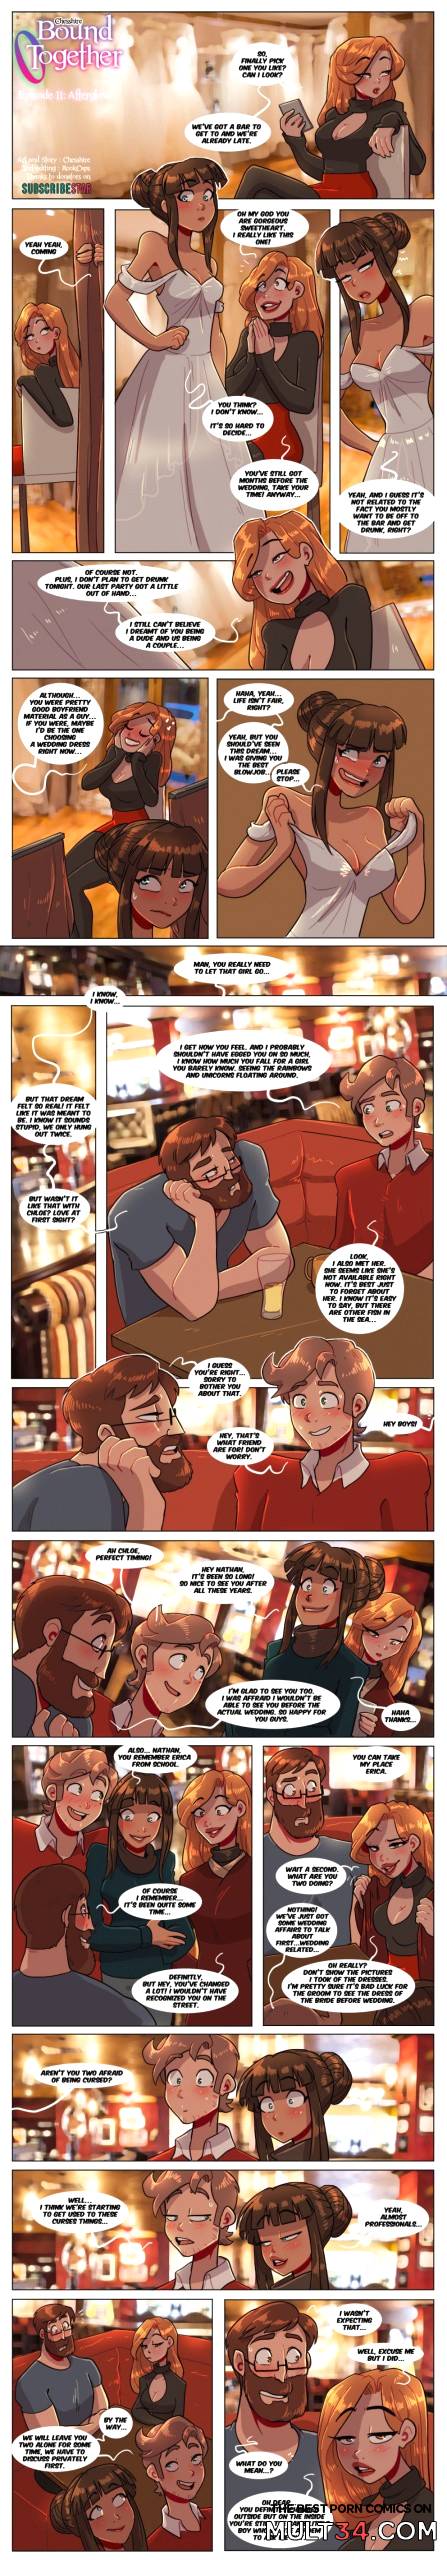 Bound Together page 17